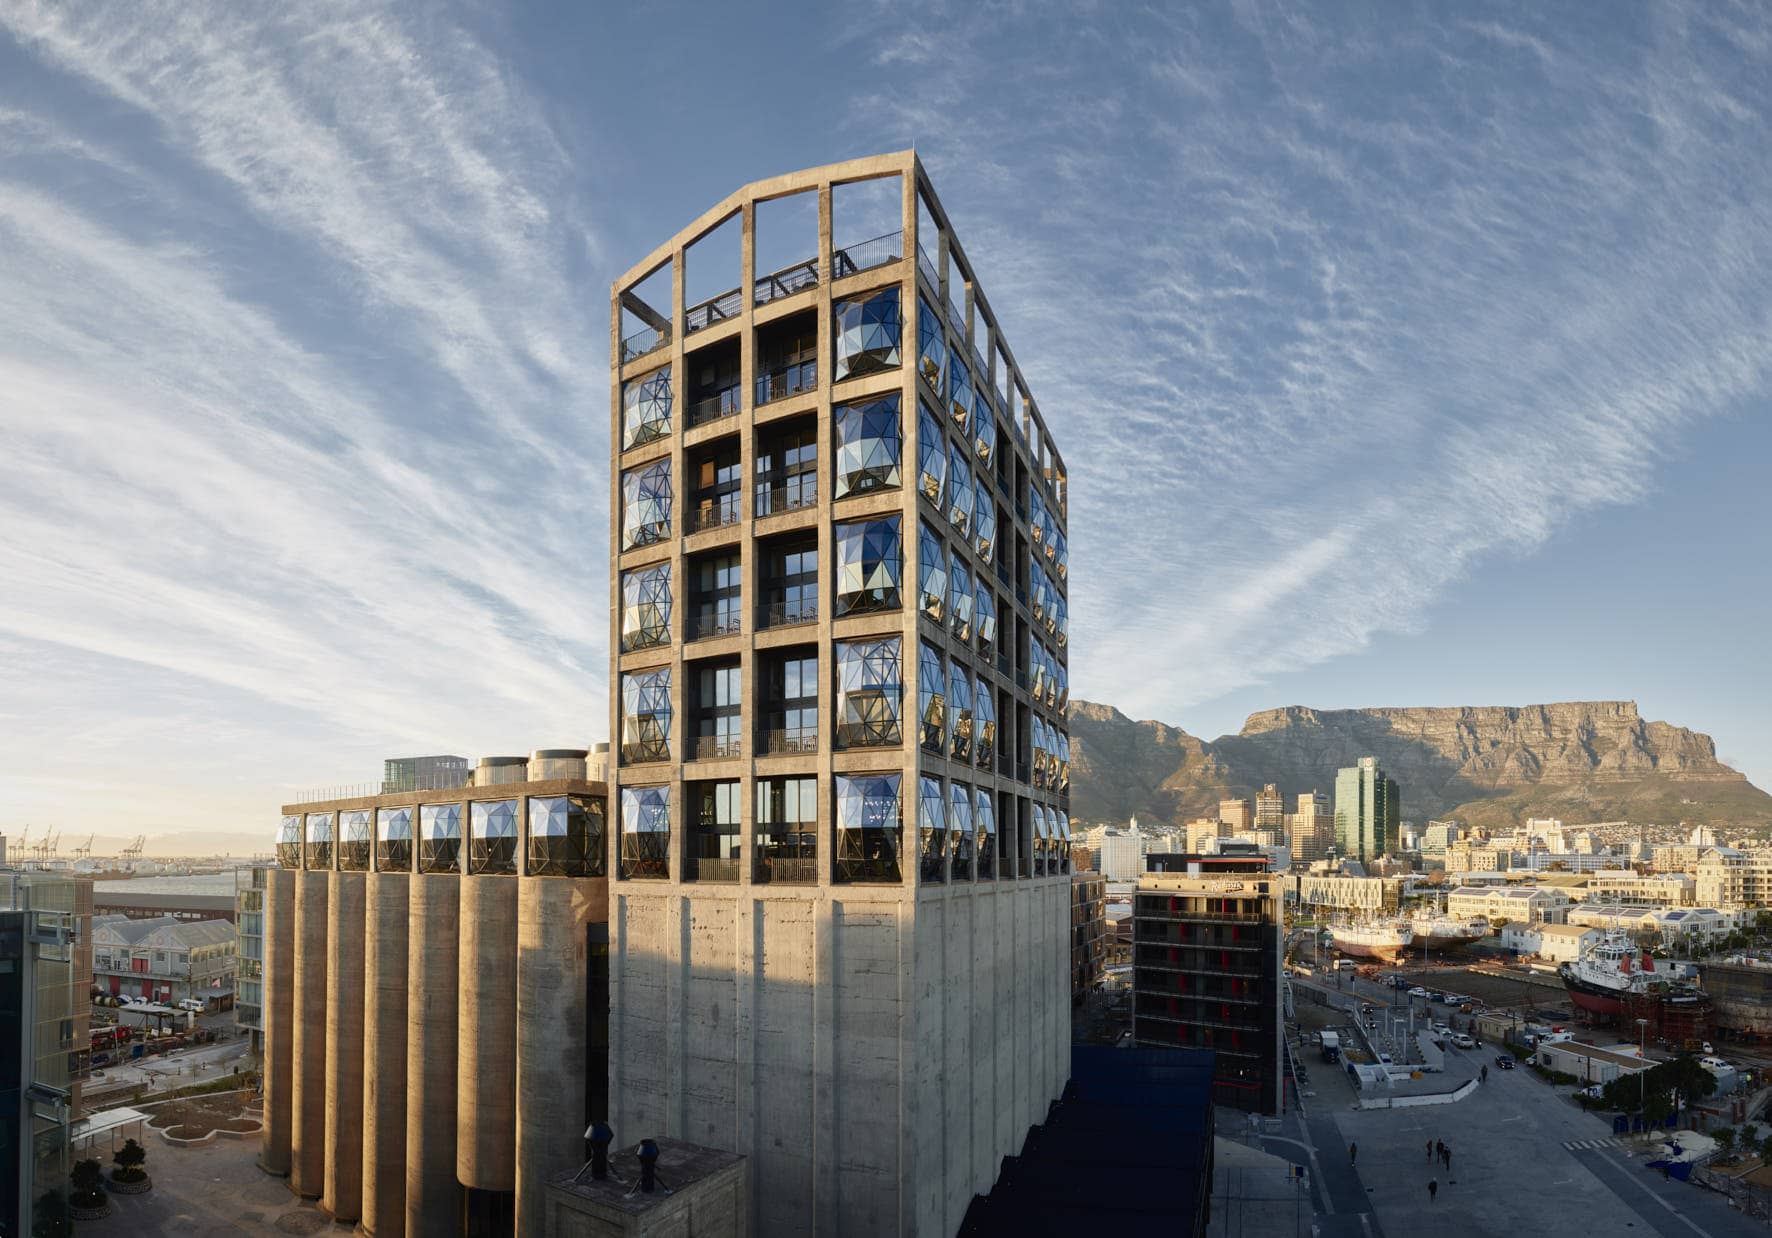 Free ticketed entrance to Zeitz MOCAA on opening weekend